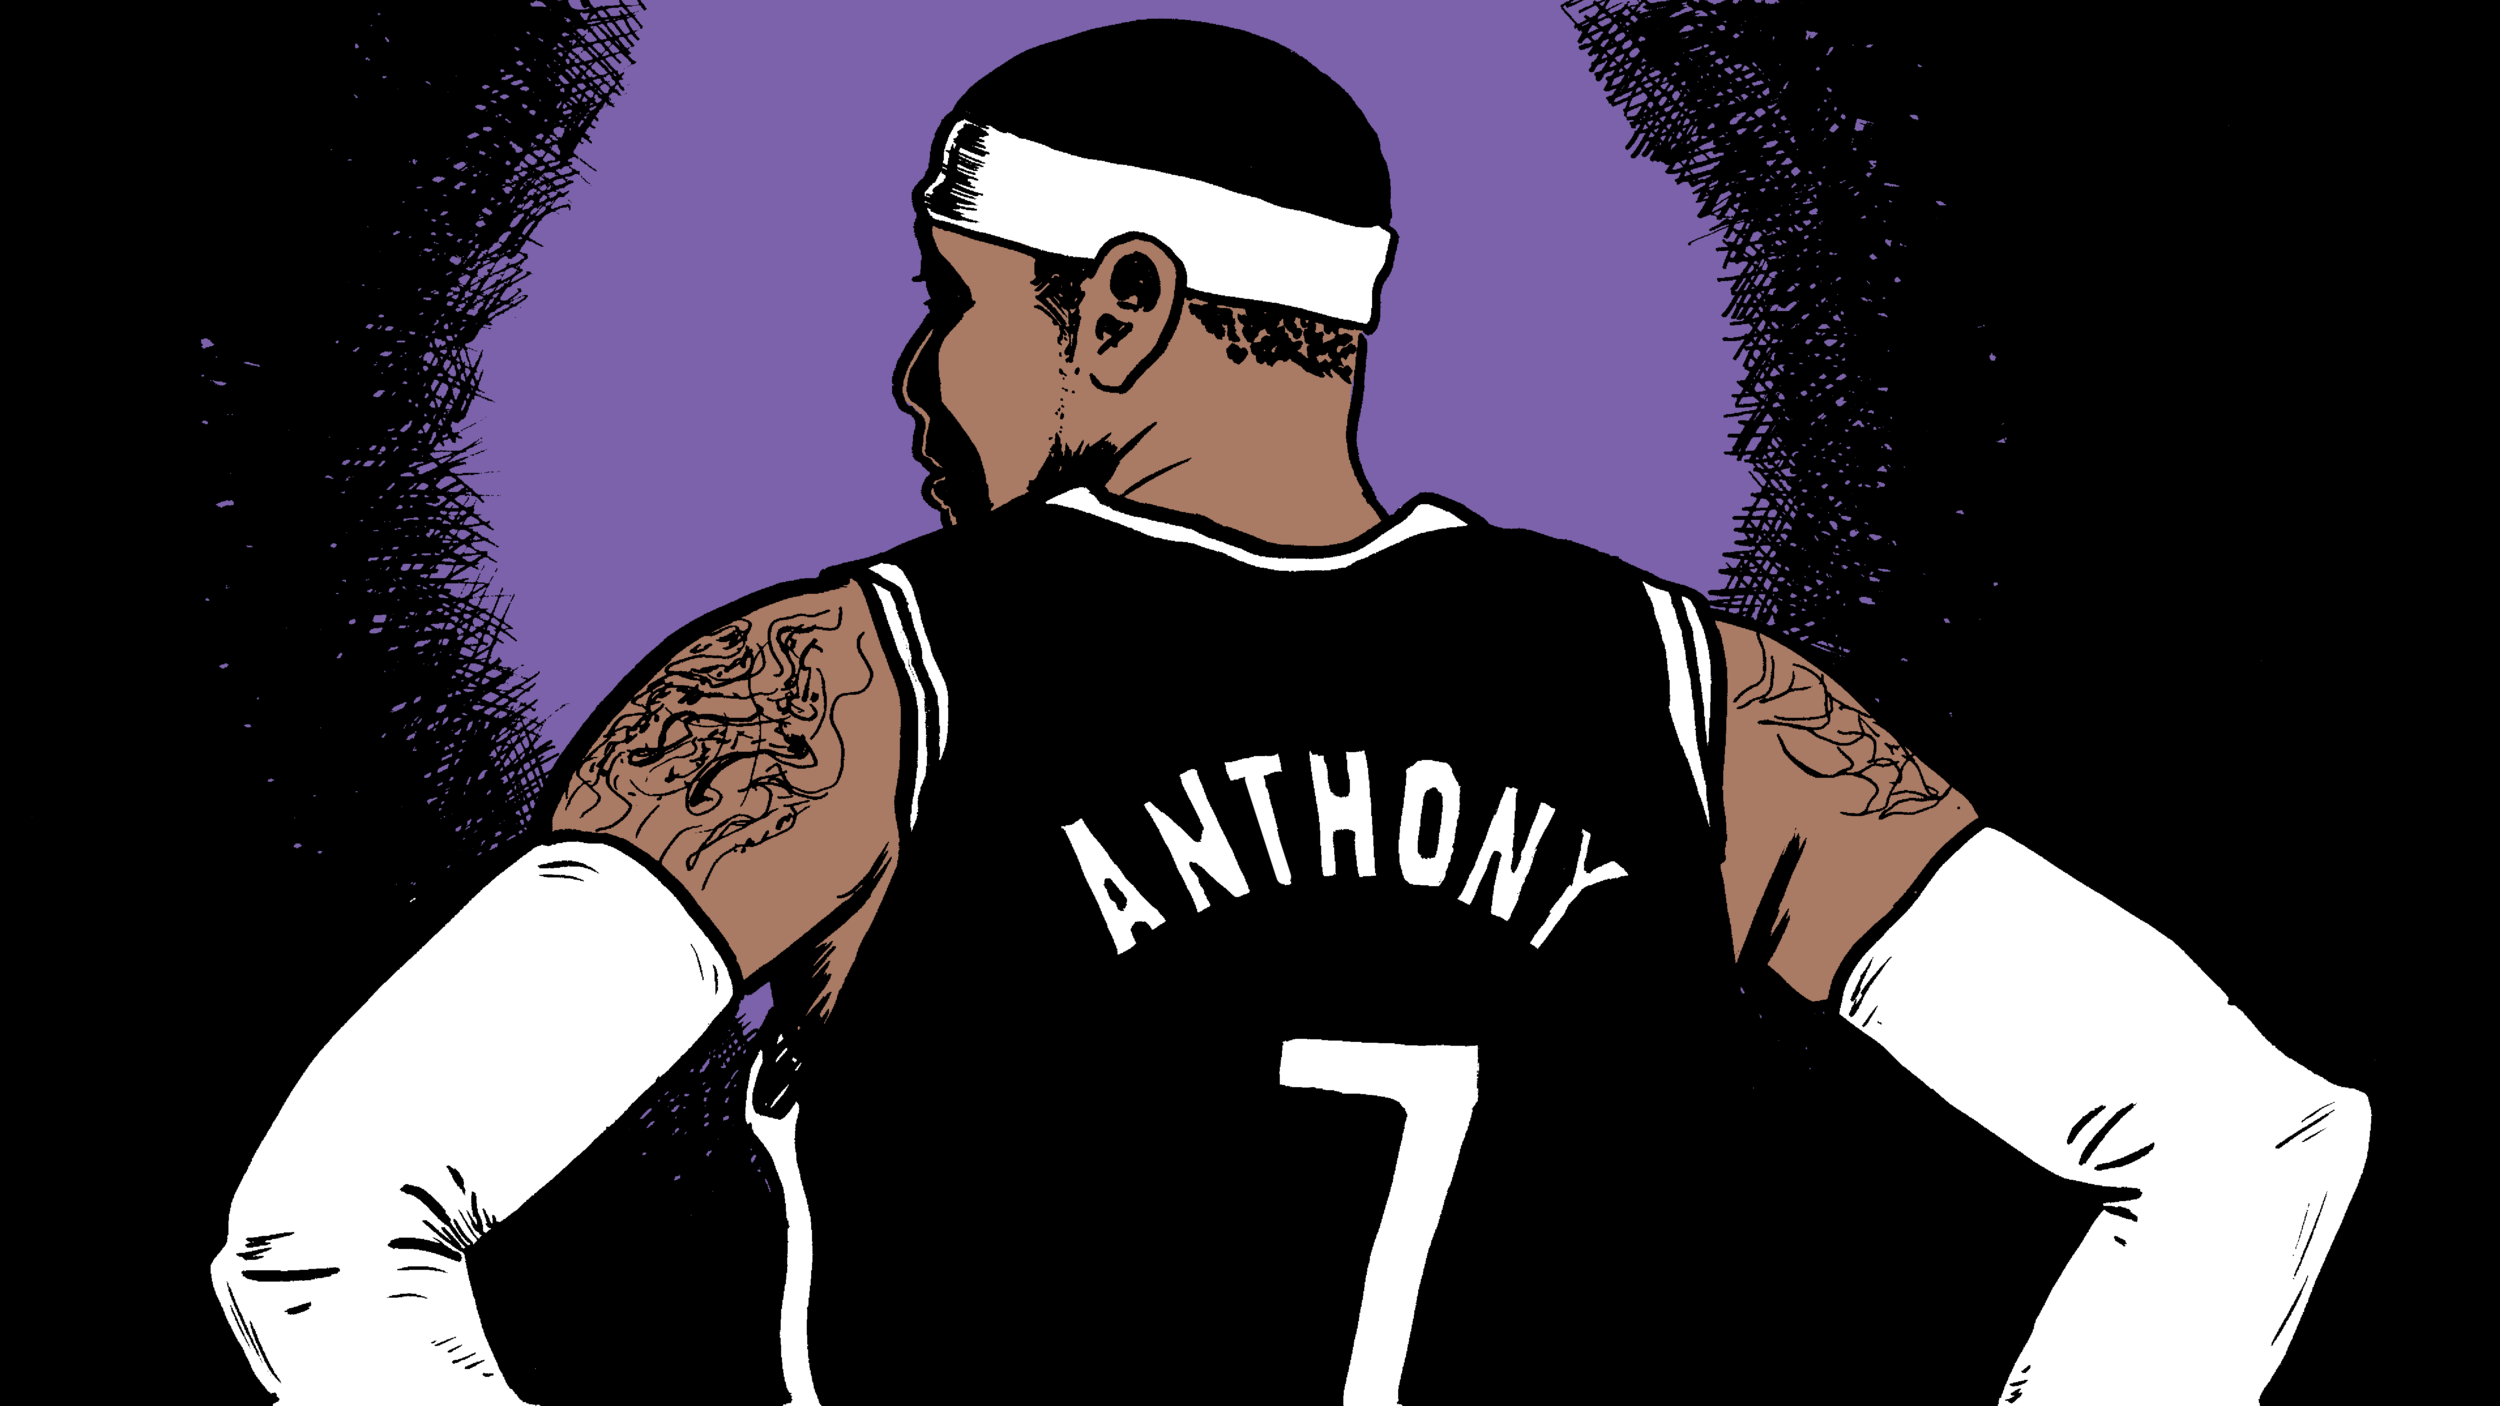 Lakers in 'serious contention' for Carmelo Anthony, according to